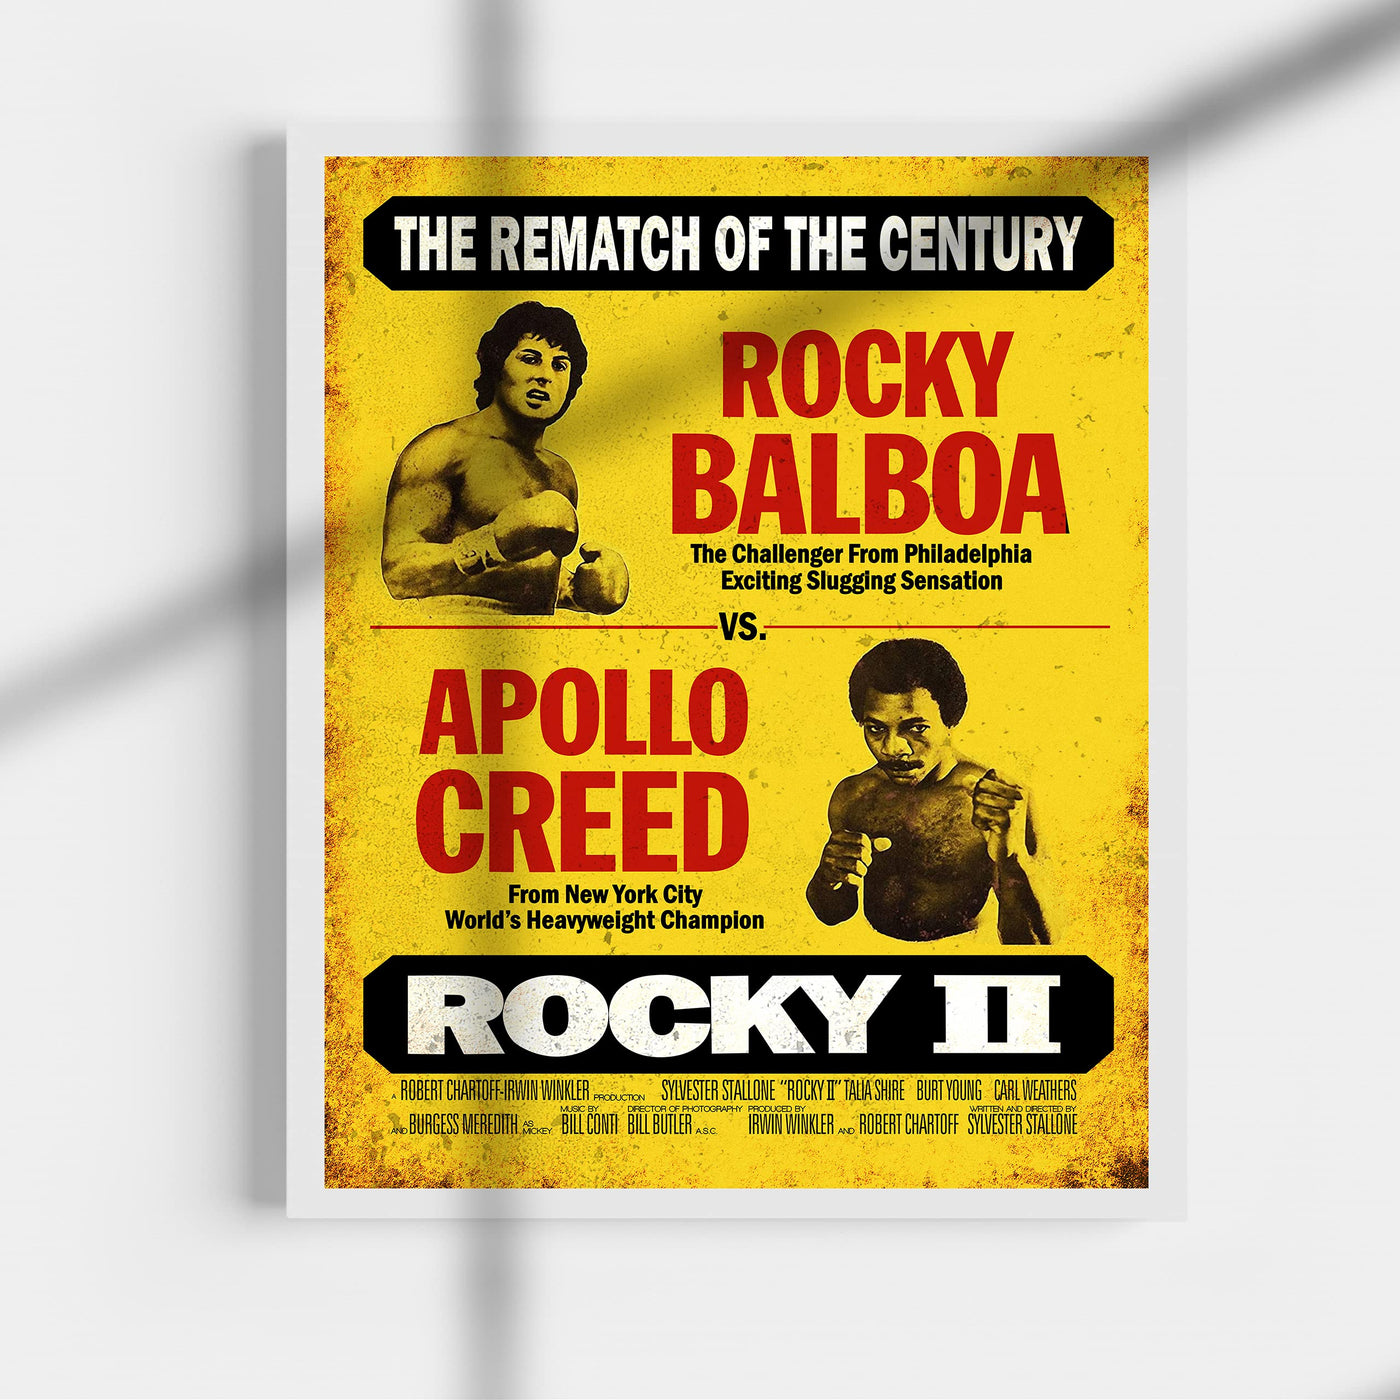 Rocky Balboa vs Apollo Creed-Rematch of the Century-Yellow Vintage Movie Wall Sign-11x14" Art Print-Ready to Frame. Home-Office-Gym-Locker Room Decor. Perfect Gift for Fans! Printed on Photo Paper.